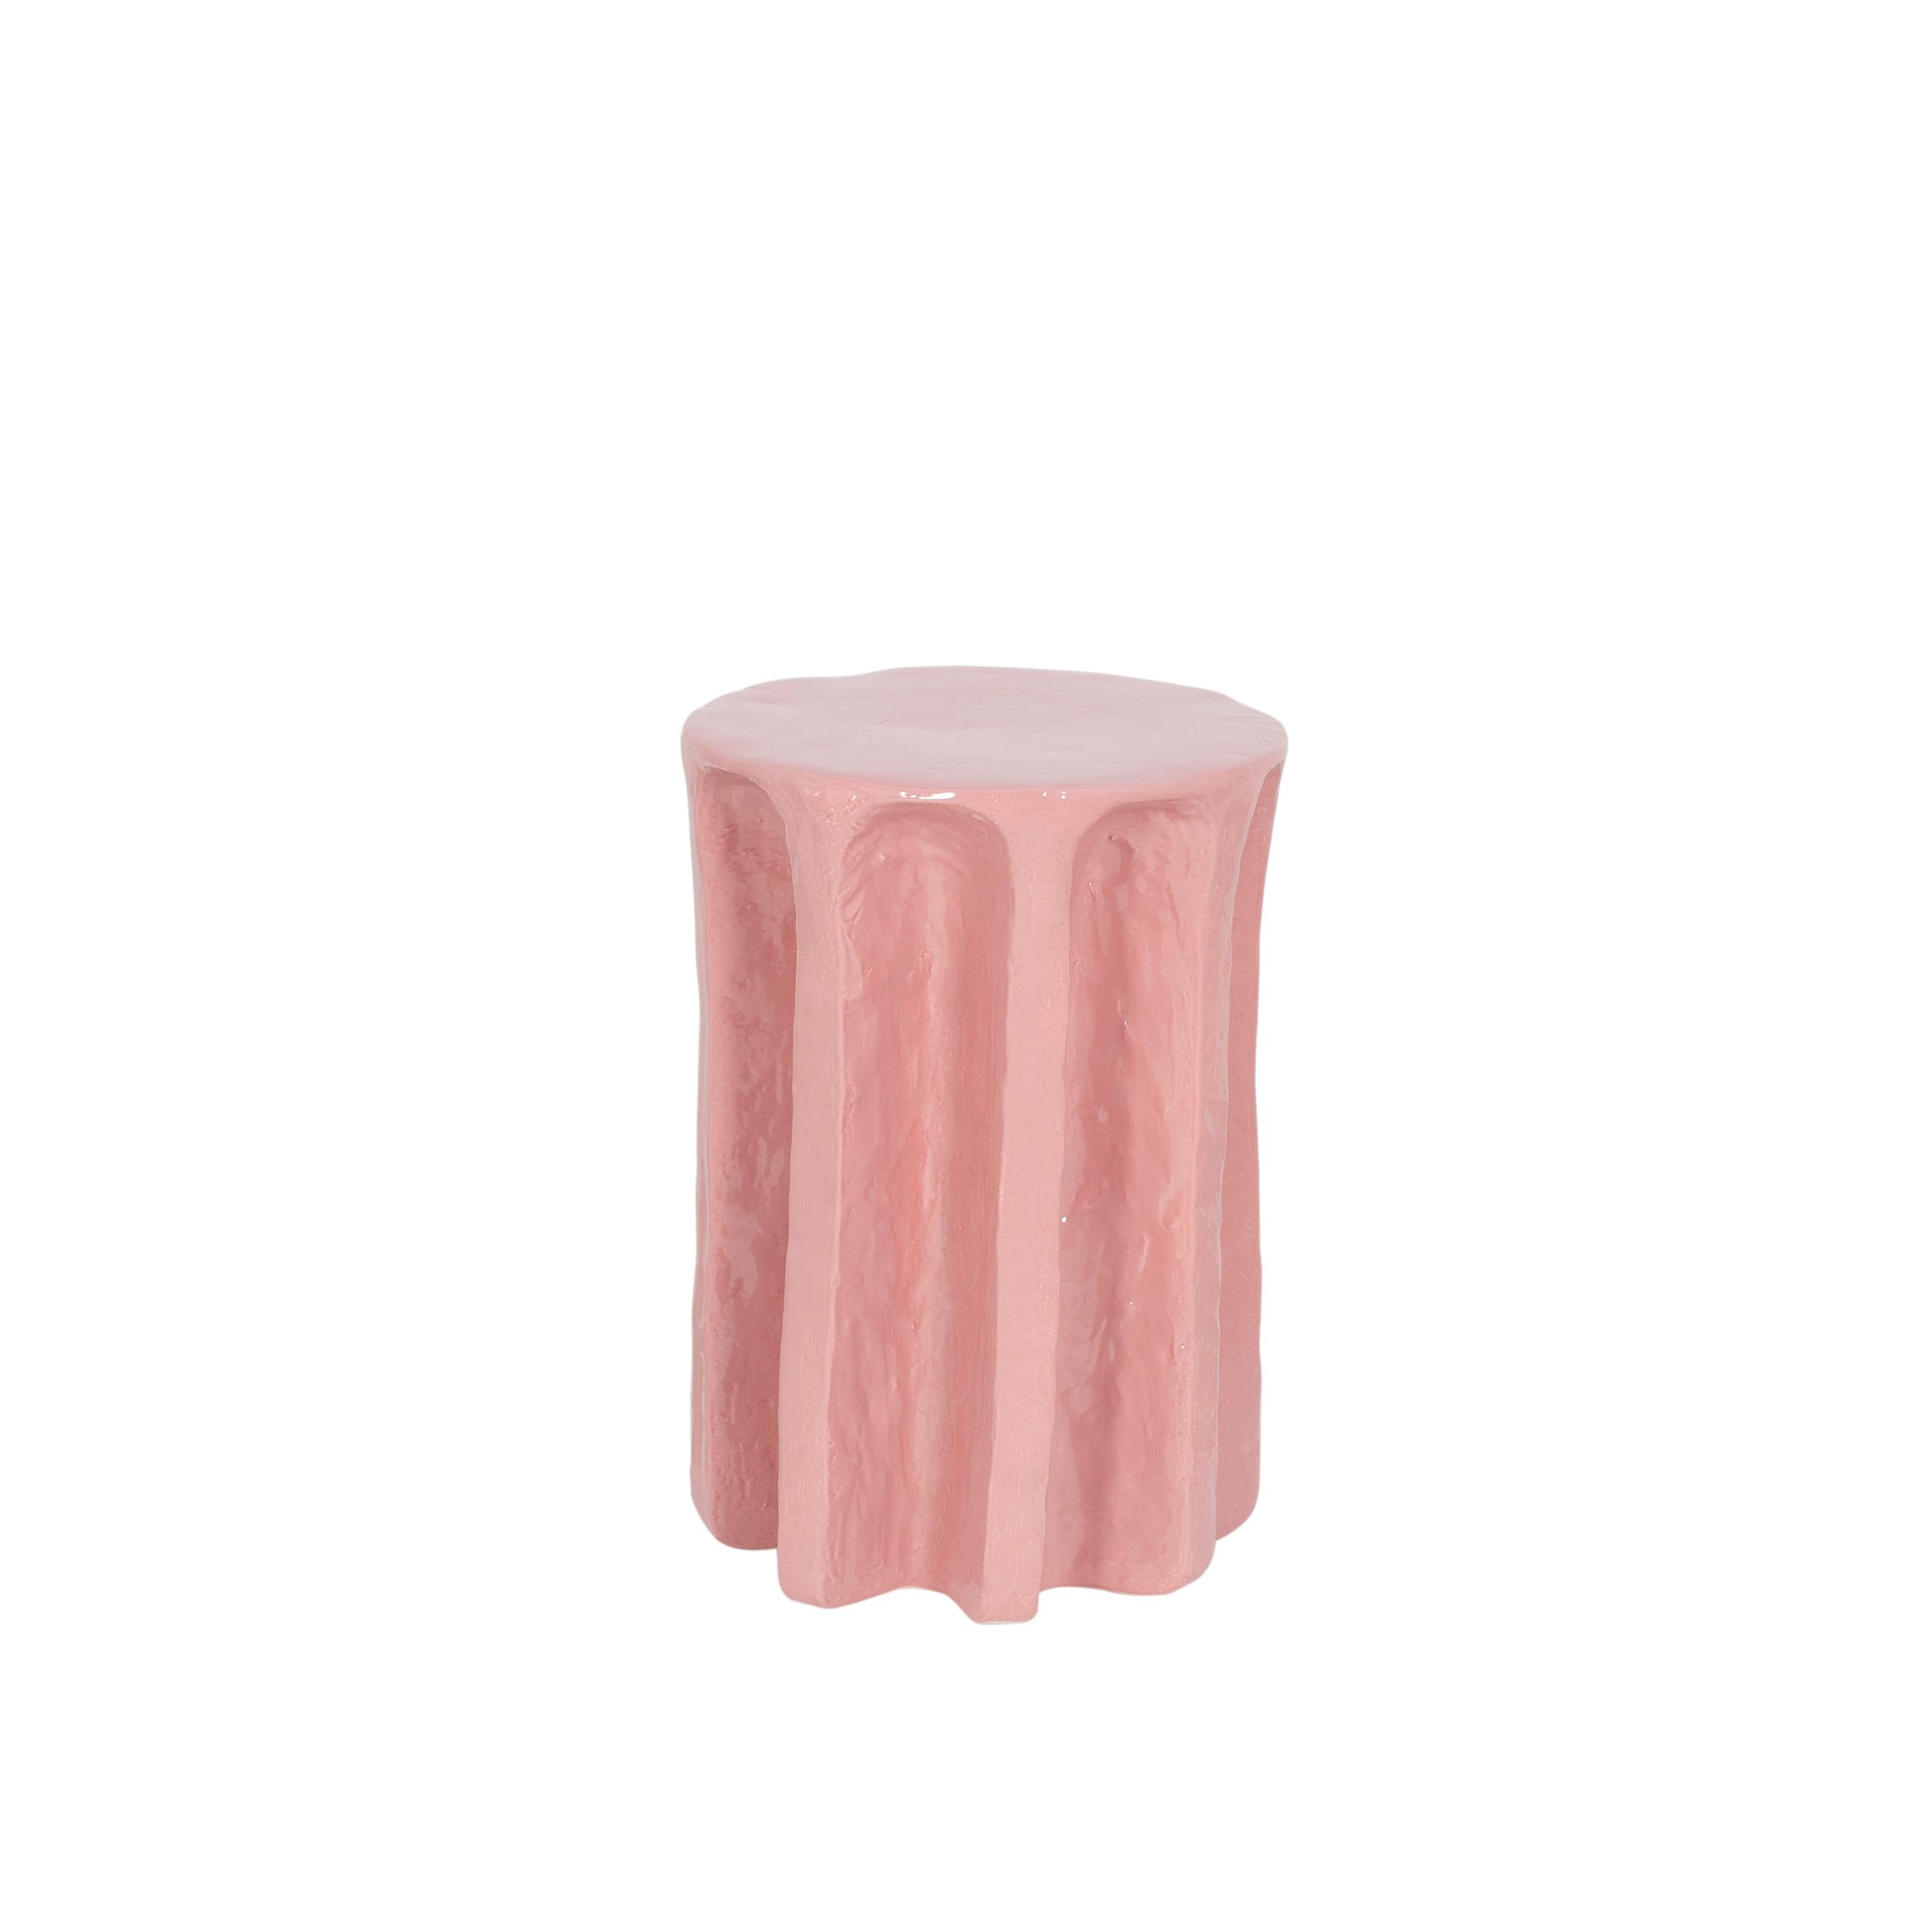 Chouchou high rose side table by Pulpo
Dimensions: D 39 x H 57 cm
Materials: ceramic

Also available in different colours.

Chouchou bears the contours of an antique column – which, knowing designer Lorenzo Zanovello’s, is most likely a